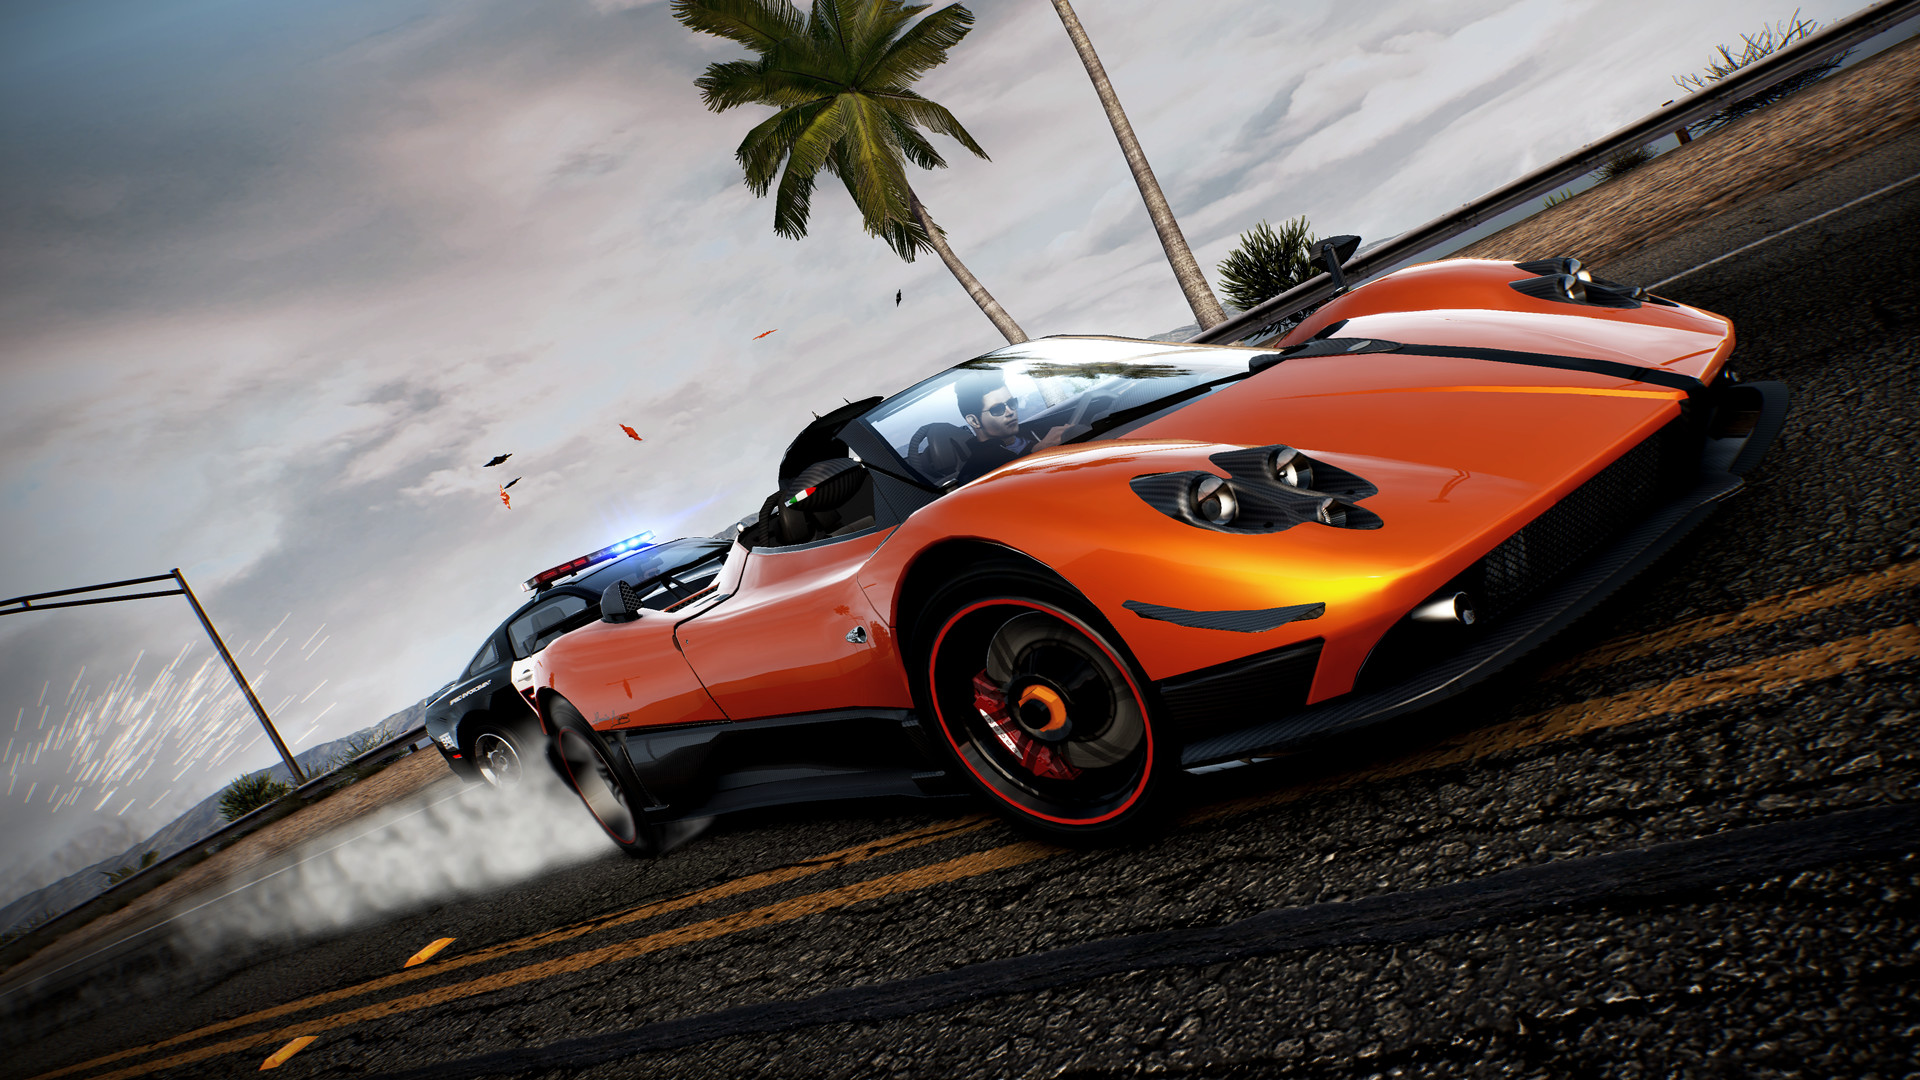 New Need for Speed Reportedly Only Launching on PS5 & Xbox Series X